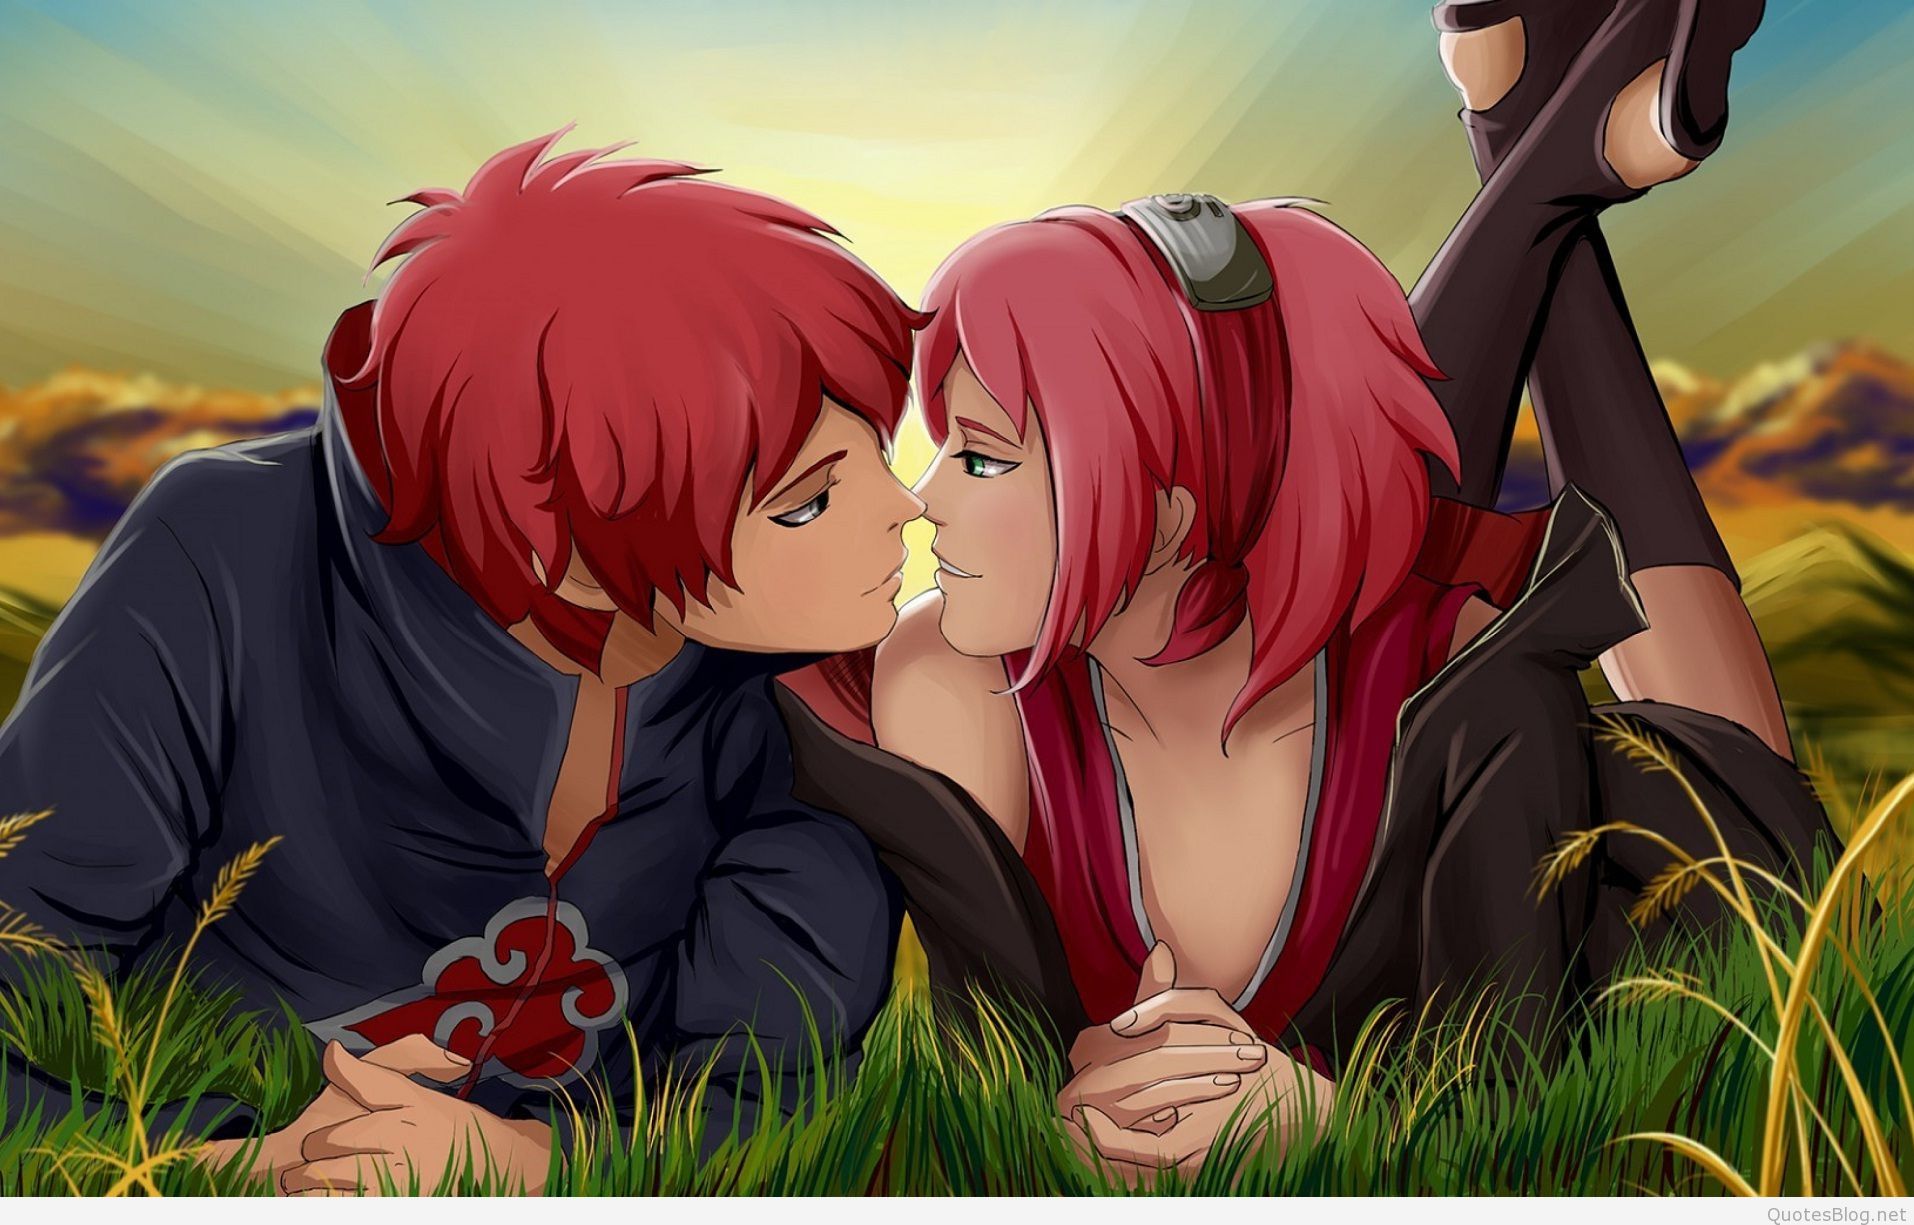 Romantic Animated Love Couple Wallpapers